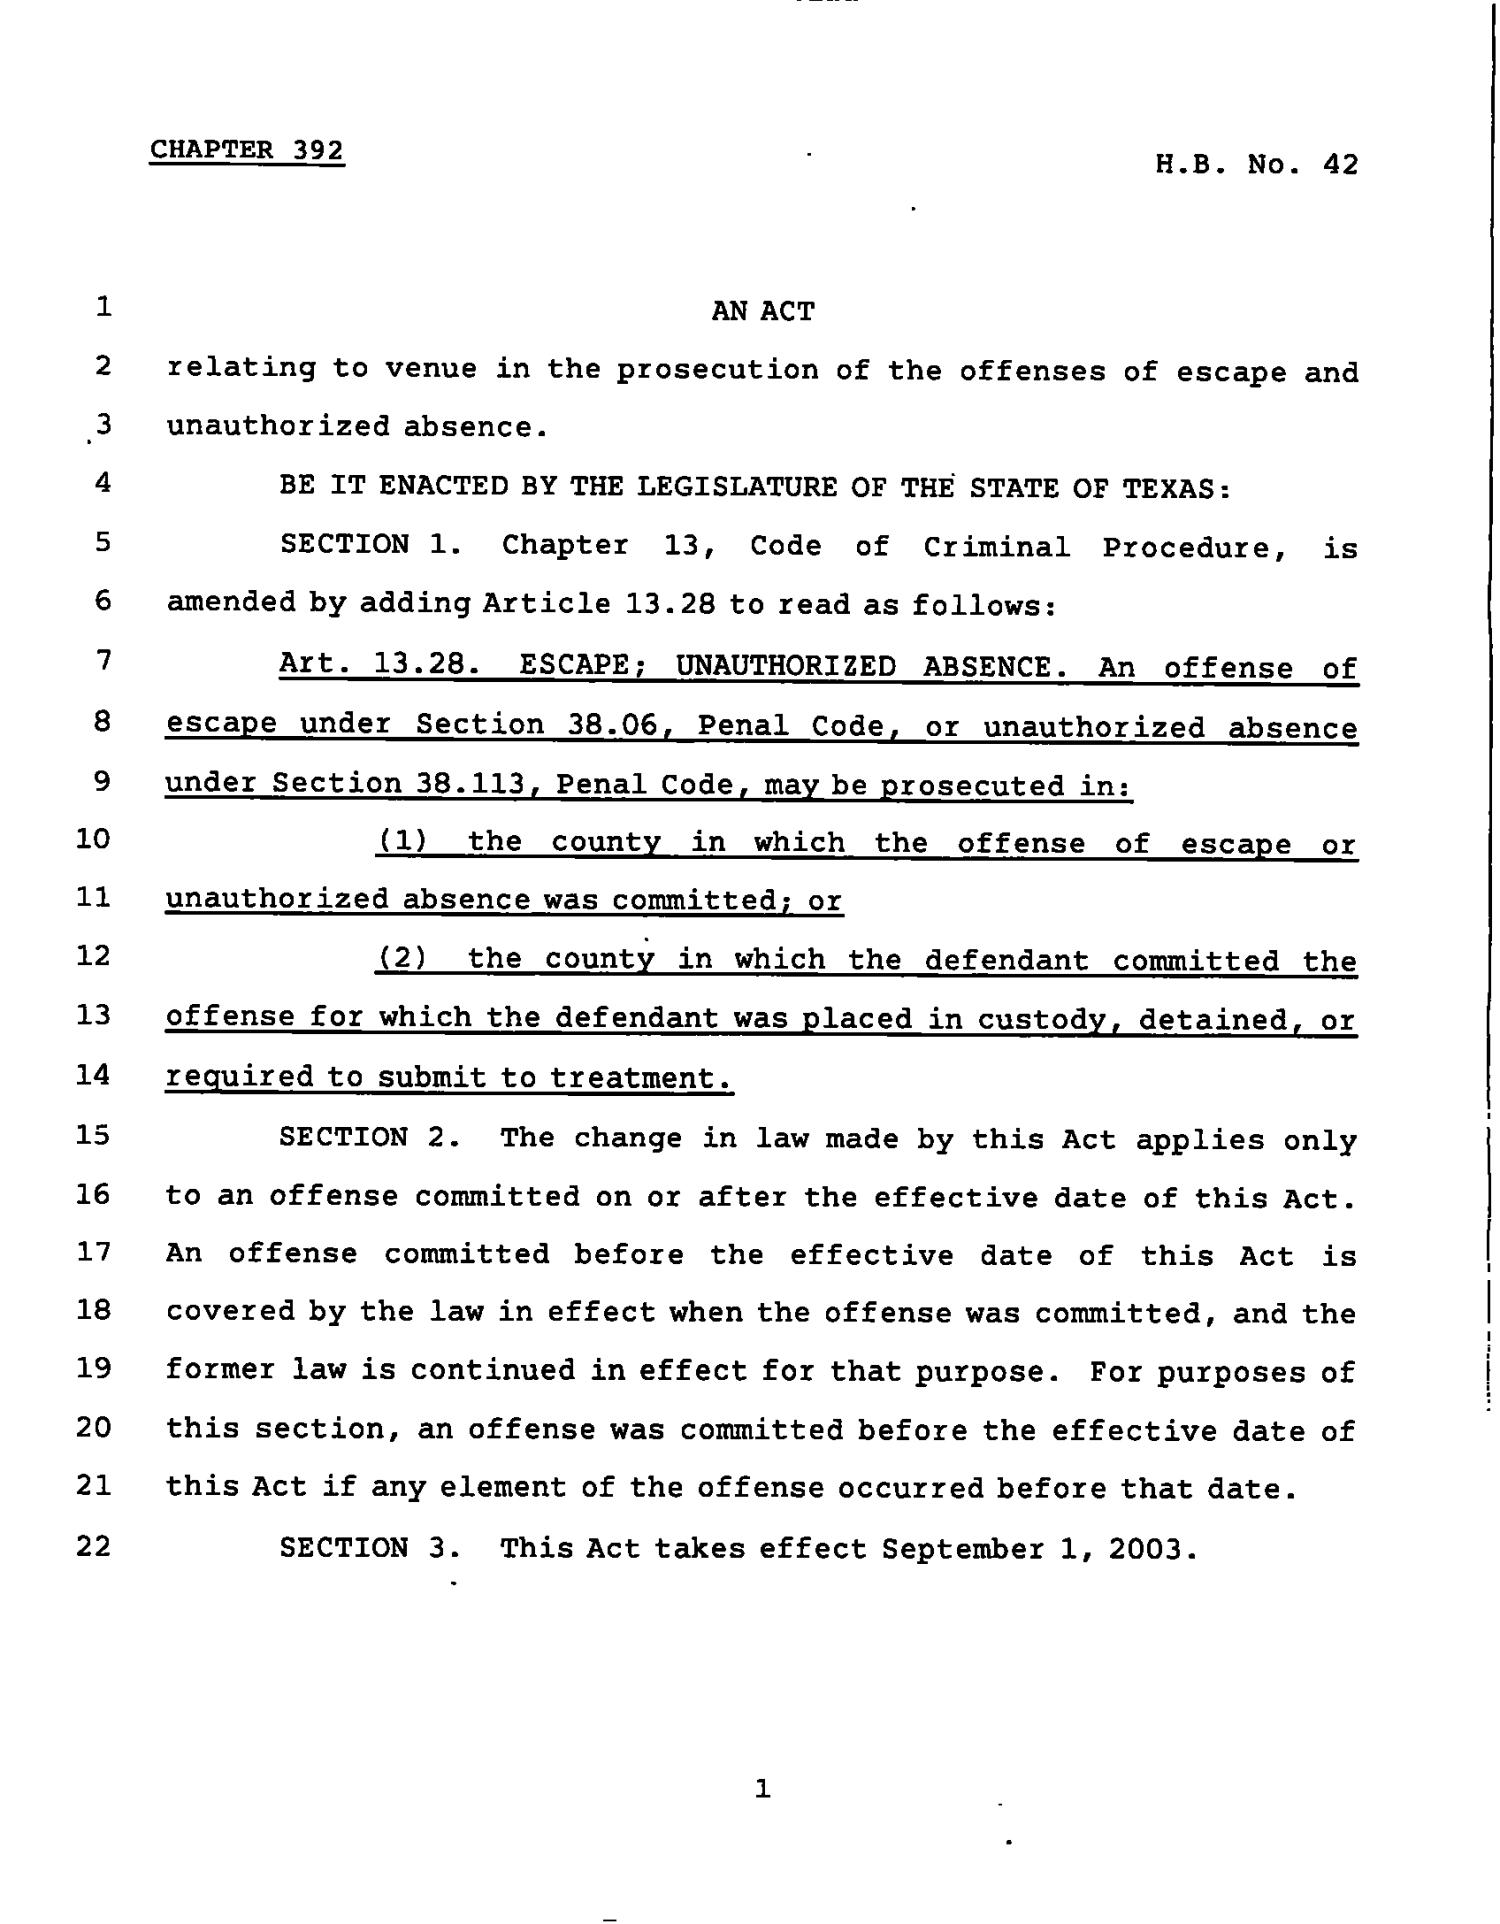 78th Texas Legislature, Regular Session, House Bill 42, Chapter 392
                                                
                                                    [Sequence #]: 1 of 2
                                                